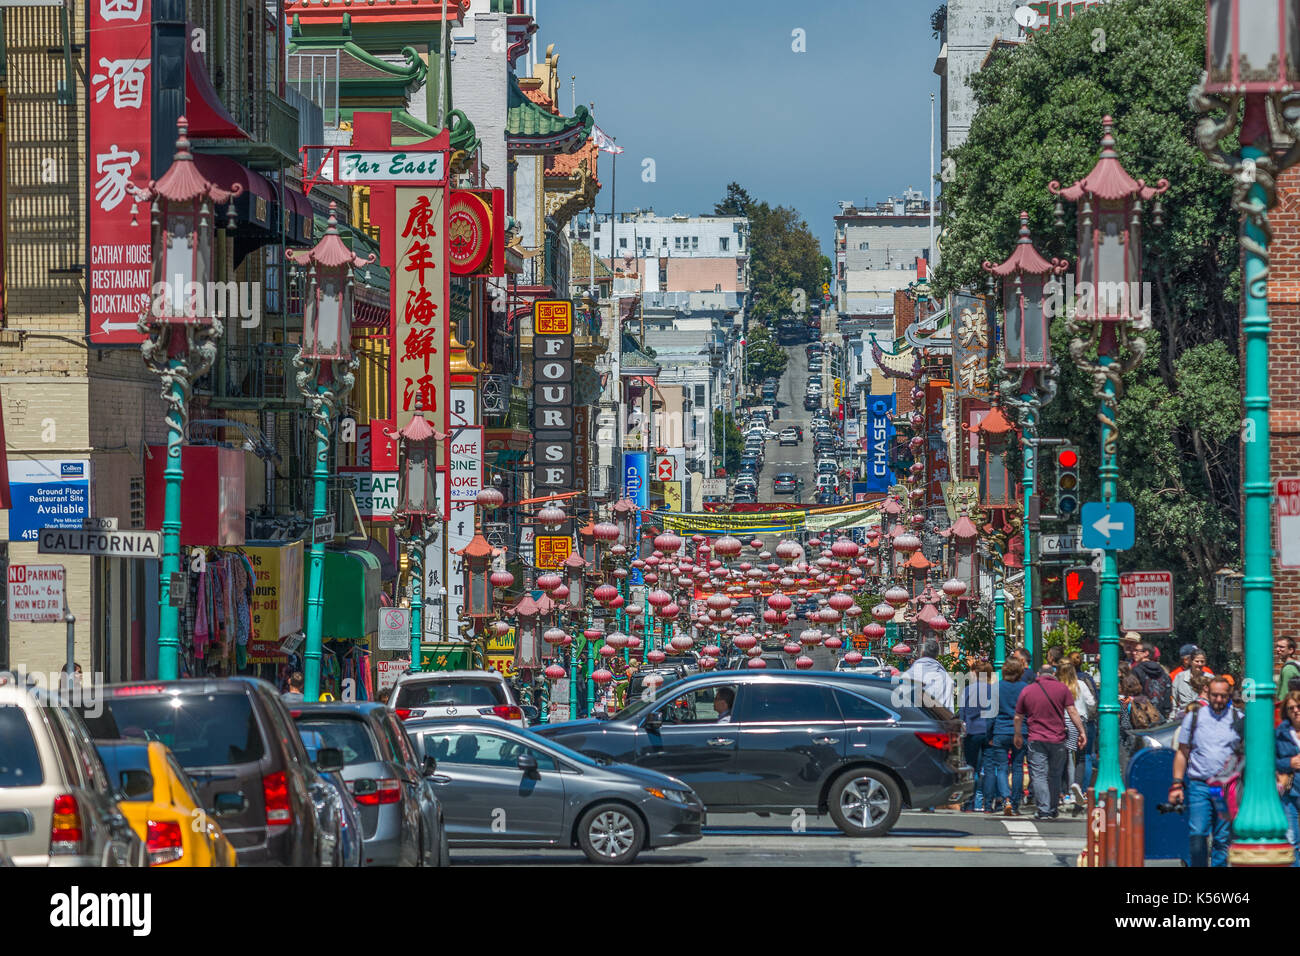 in the streets of China Town, San Francisco, CA Stock Photo